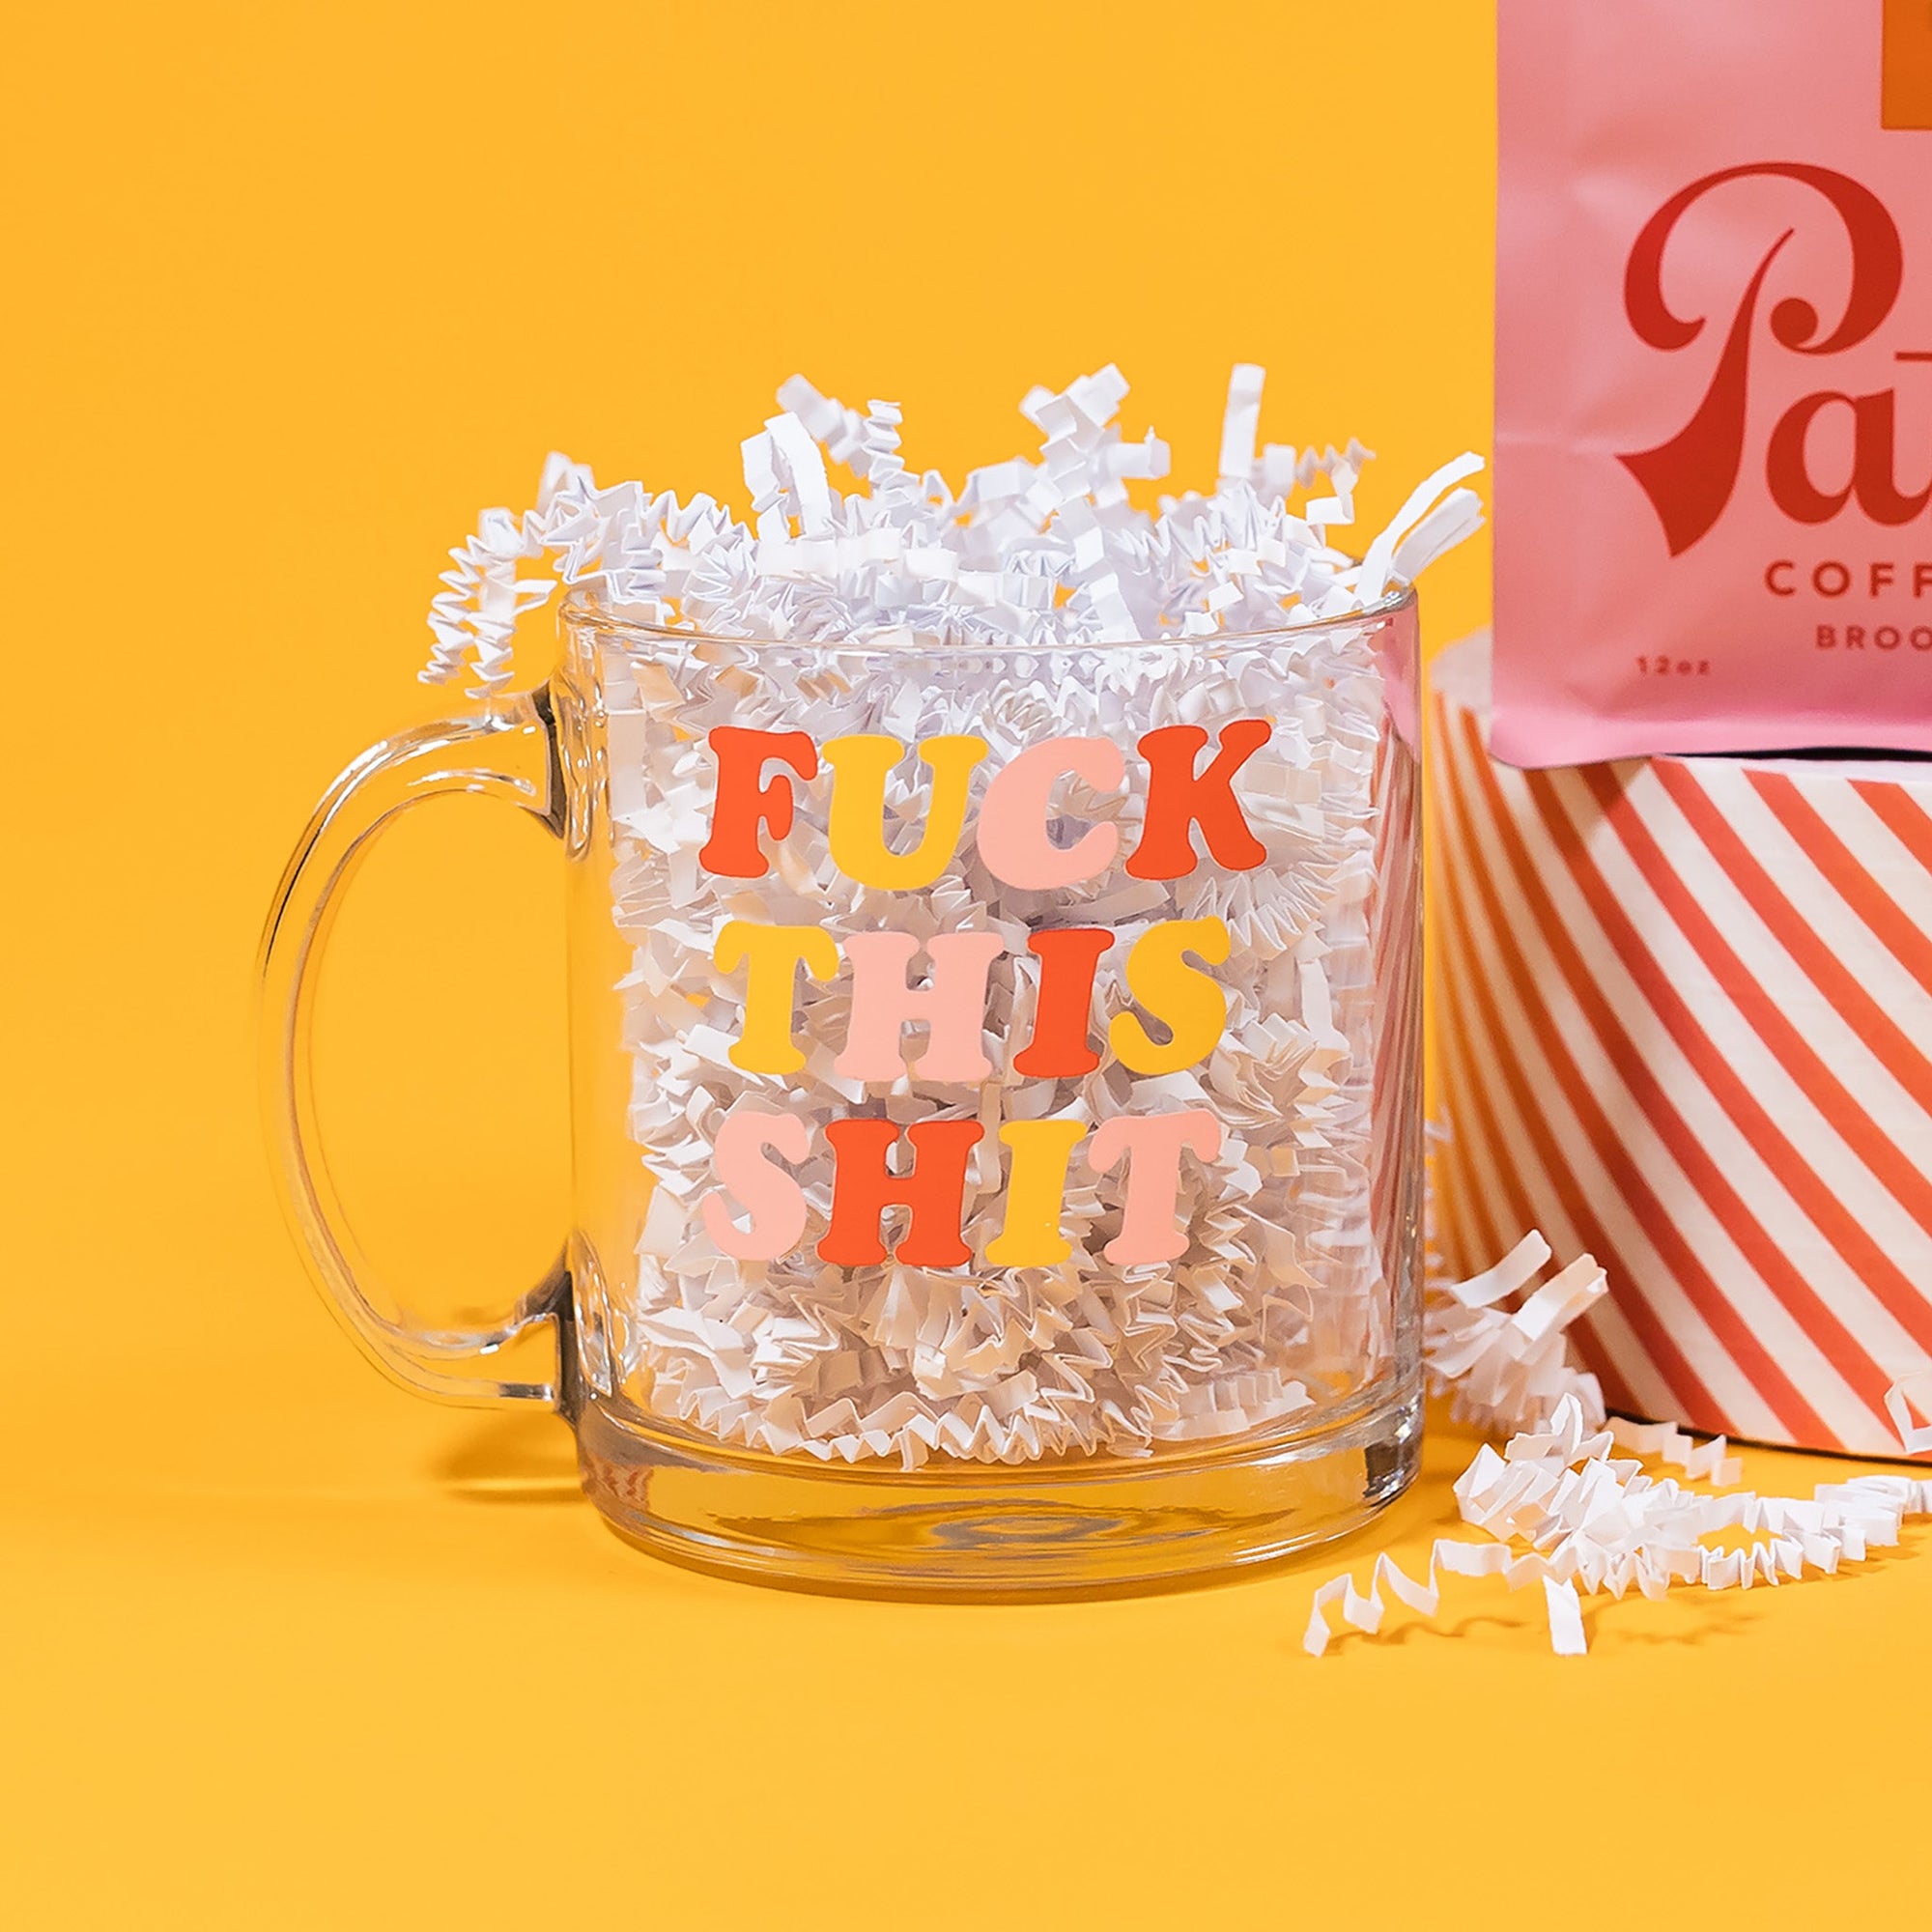 On a sunny mustard background sits a mug with white crinkle in it. This clear mug says "FUCK THIS SHIT" in a colorful, thick serif font. The colors are watermelon pink, sunny mustard and light pink.